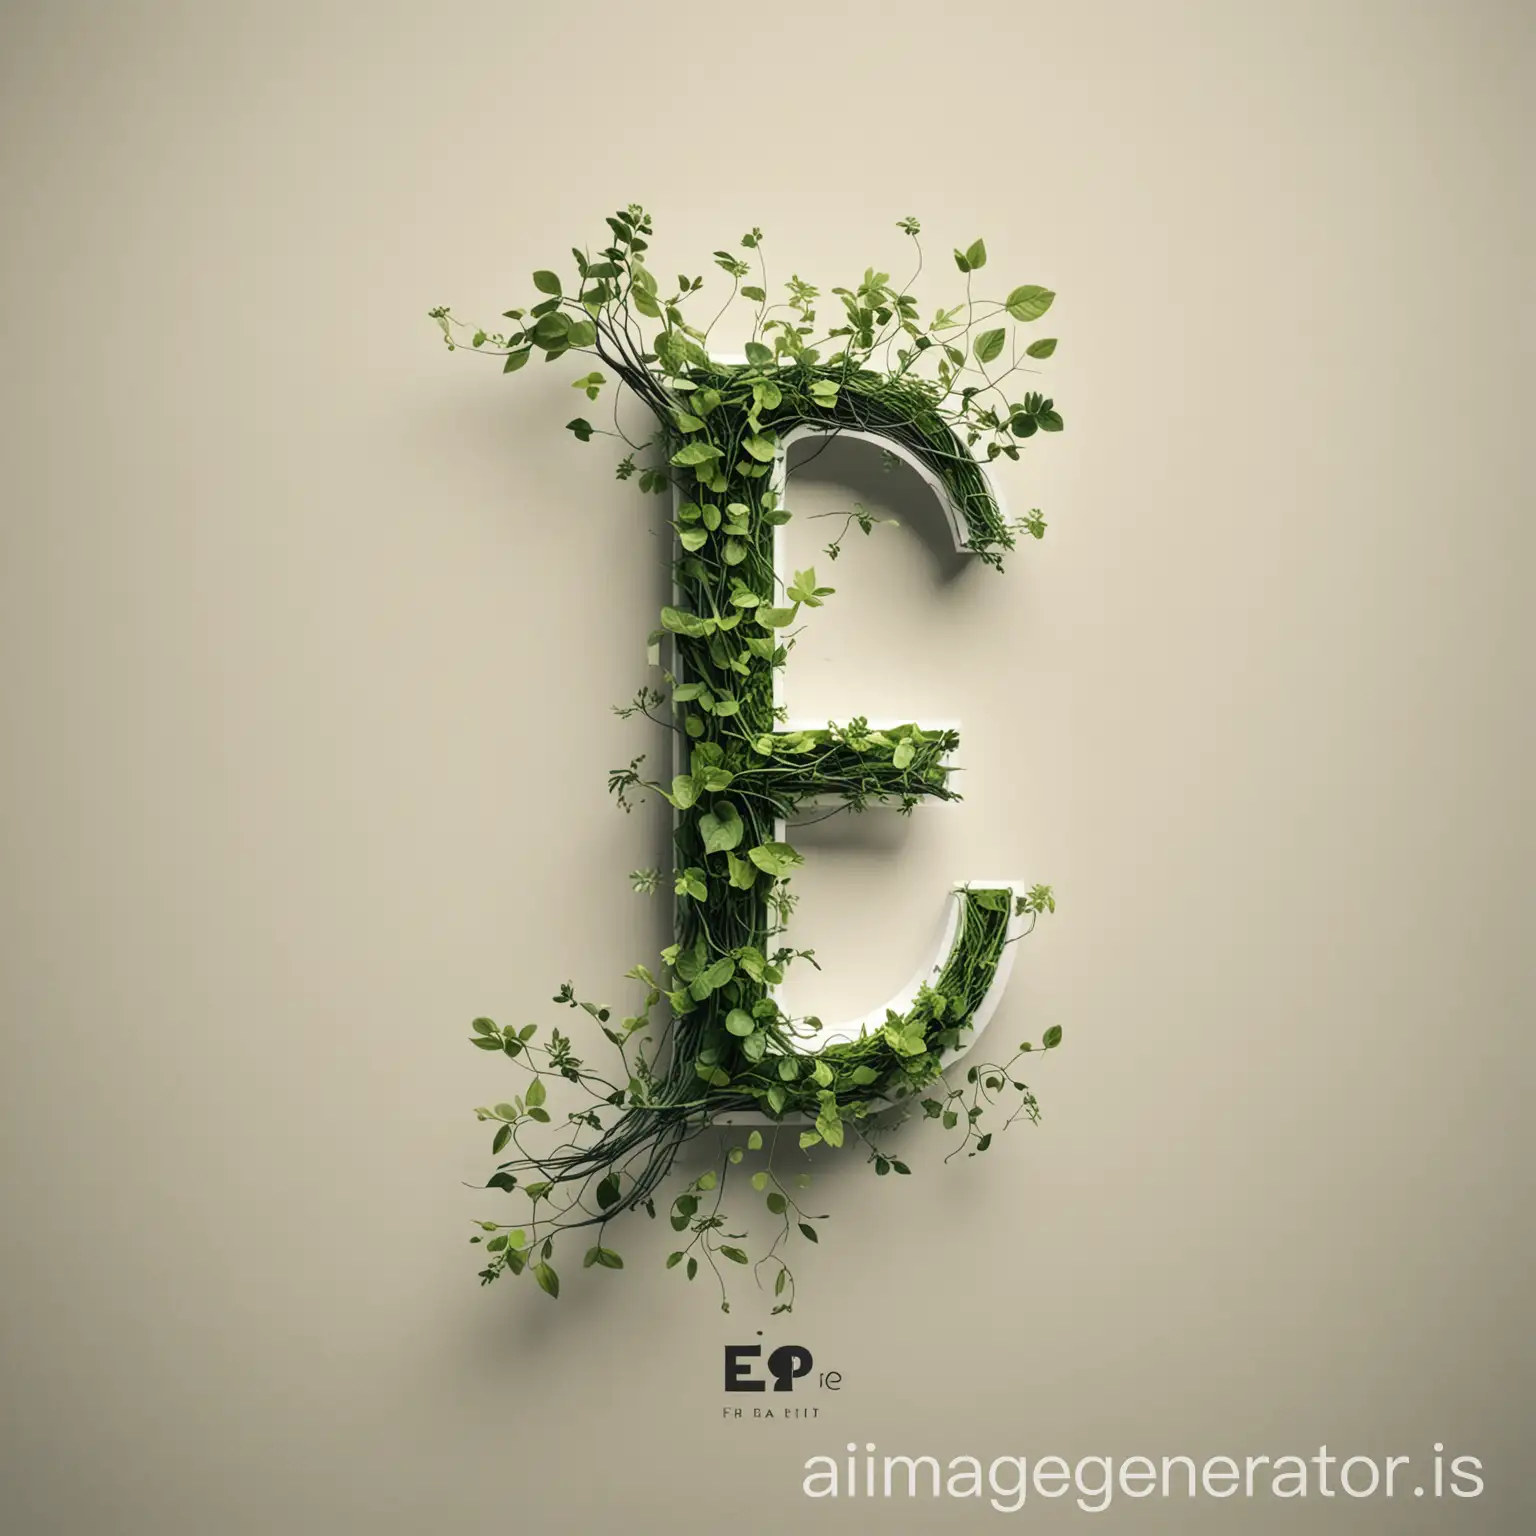  EPLANT logo concept:

The letters "E" and "P" are stylized as interconnected, vine-like forms, subtly incorporating plant imagery. The "E" has a circuit pattern integrated into its vertical stem, hinting at IoT technology. The "P" is designed with sensors subtly placed within its leaf-inspired formations. Negative space in the interconnected region between "E" and "P" represents connectivity and technological innovation. The overall aesthetic is sleek and modern, utilizing a minimal color palette to evoke elegance and sophistication.